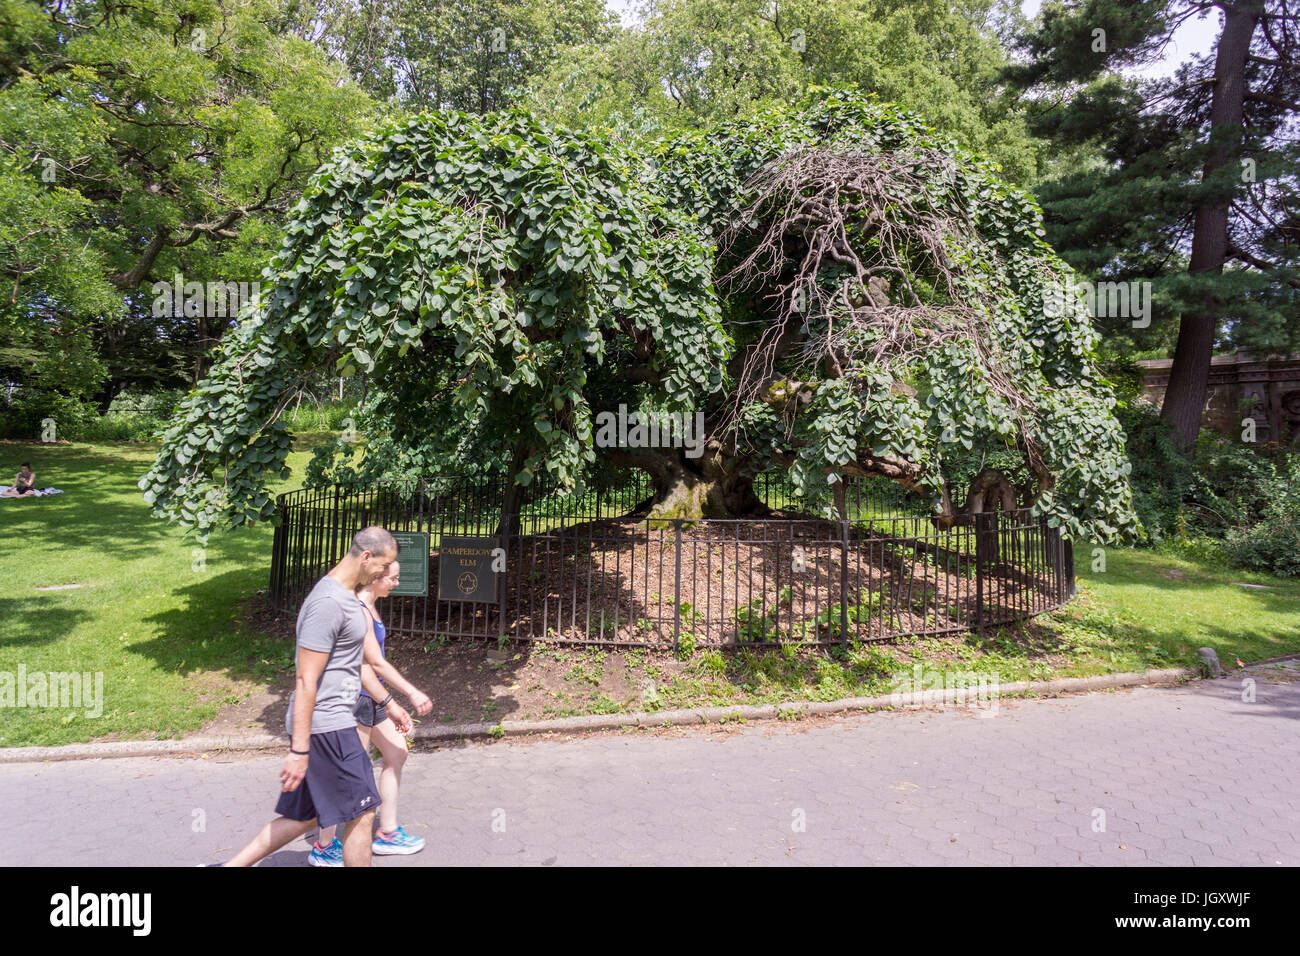 The Camperdown Elm tree in Prospect park in Brooklyn in New York on Saturday, July 8, 2017. The tree was planted in the park in 1872 and is  one of the first camperdown elms planted in the United State. The trees originated on the estate of the Earl of Camperdown in Scotland.(© Richard B. Levine) Stock Photo